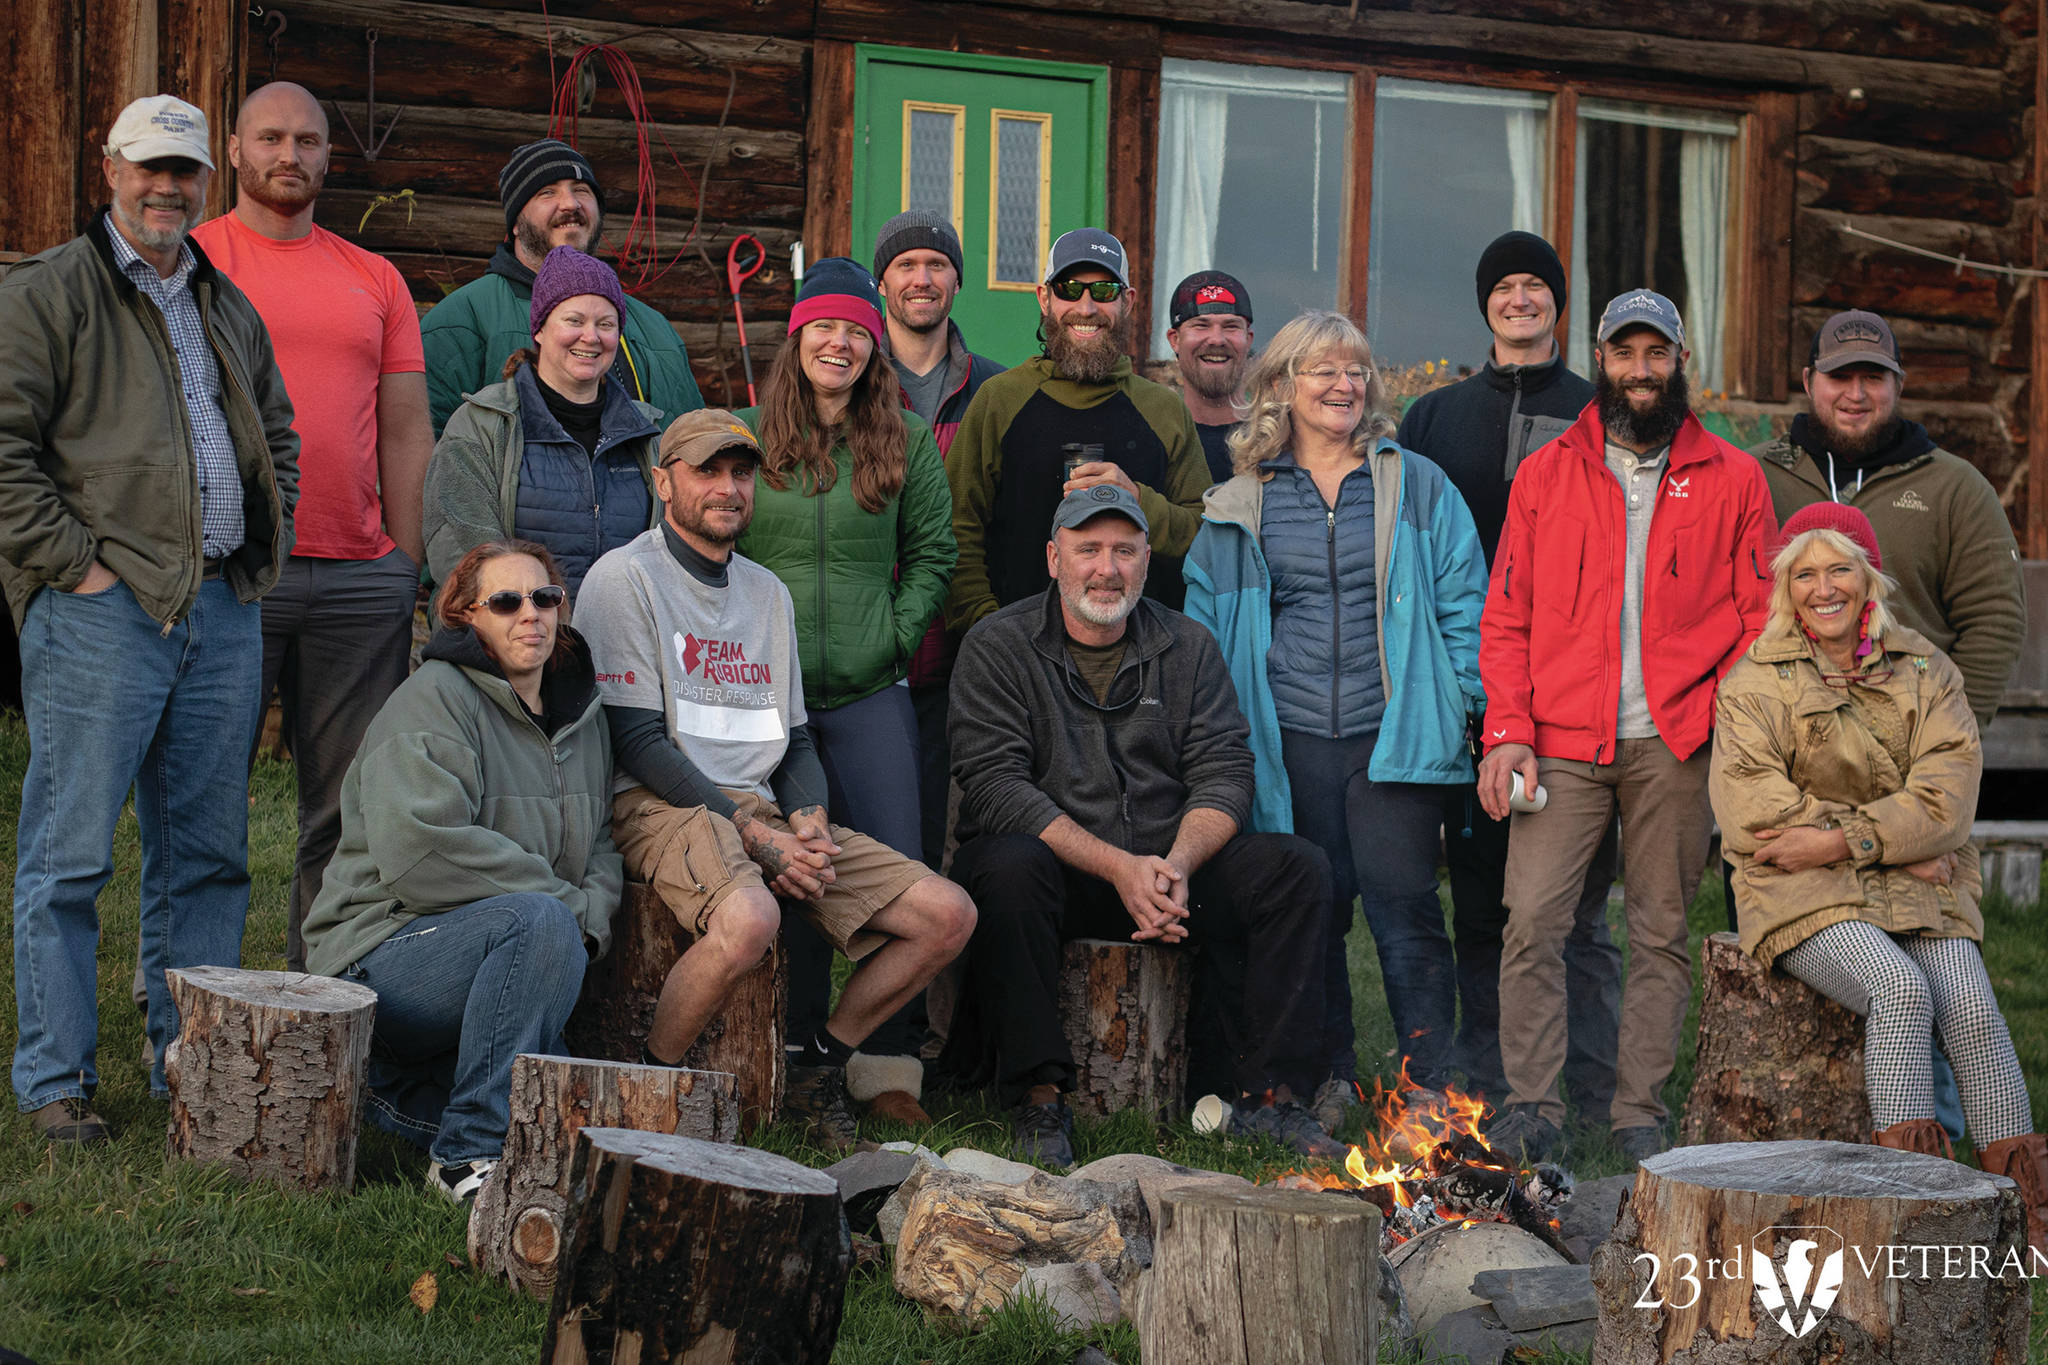 A group of veterans who participated in the 23rd Veteran trip to Homer, Alaska, pose at the Kilcher Family Homestead near Homer, Alaska, on the last day of the trip on Friday, Oct. 16, 2020. At far right, front, is Stellavera Kilcher, and third from right is Catkin Kilcher Burton, two of the Kilcher family members who participated in the visit. (Photo courtesy of 23rd Veteran)